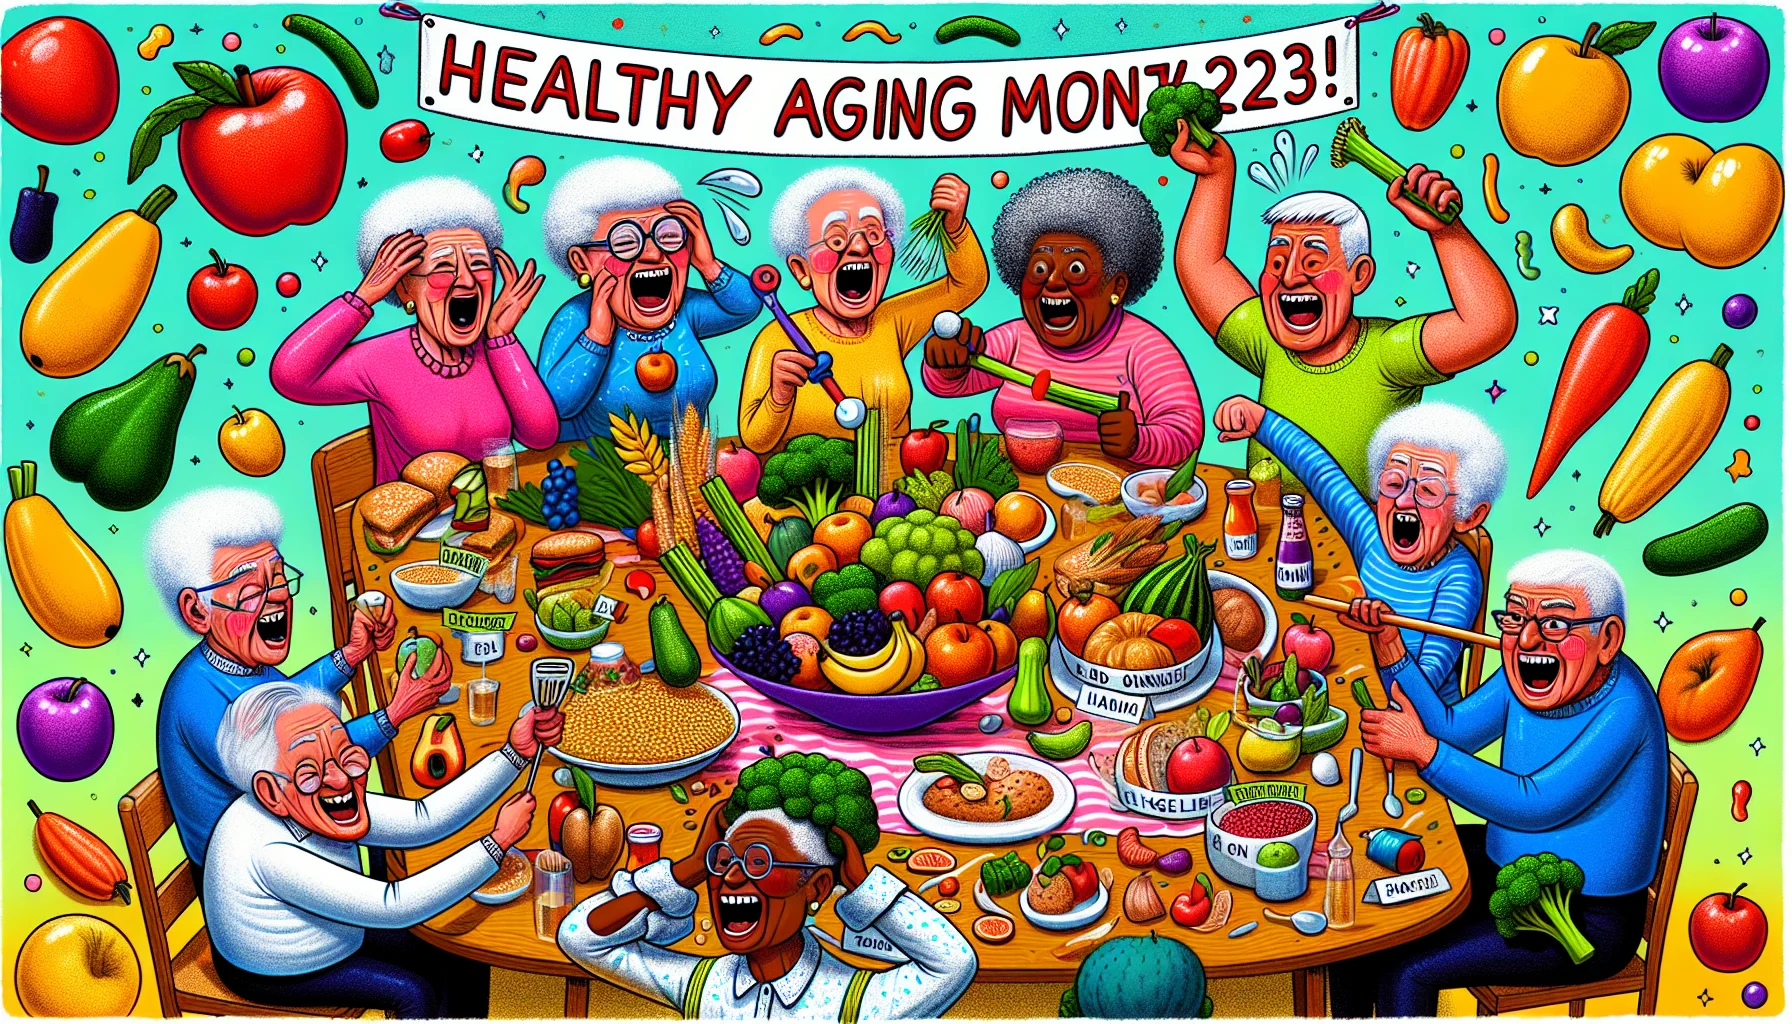 A whimsical, funny illustration for Healthy Aging Month 2023. Depict a multicultural and multi-gendered group of elderly individuals, each of different descents such as Hispanic, Black, South Asian, and Caucasian, engaging in hilariously exaggerated healthful habits. They are seated around a table piled high with colorful fruits, vegetables, and whole grains. One person is trying to balance an apple on their head while laughing, another is playfully fighting off a broccoli with a celery stick like they’re fencing. Add a festive banner that reads 'Healthy Aging Month 2023' in the background. The image should burst with vibrant colors and humorous details.